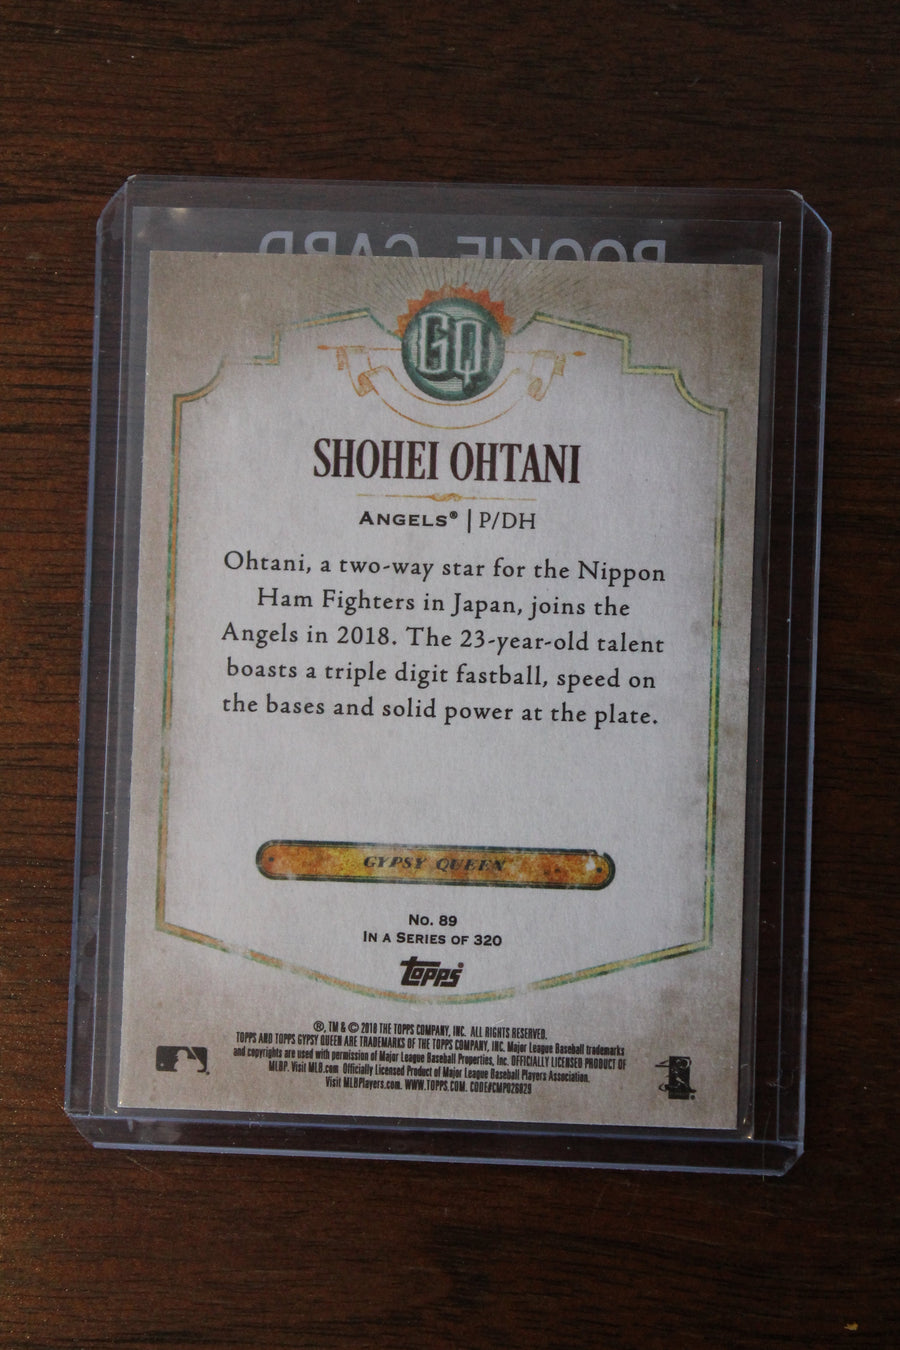 Shohei Ohtani 2018 Topps Gypsy Queen Rookie Card